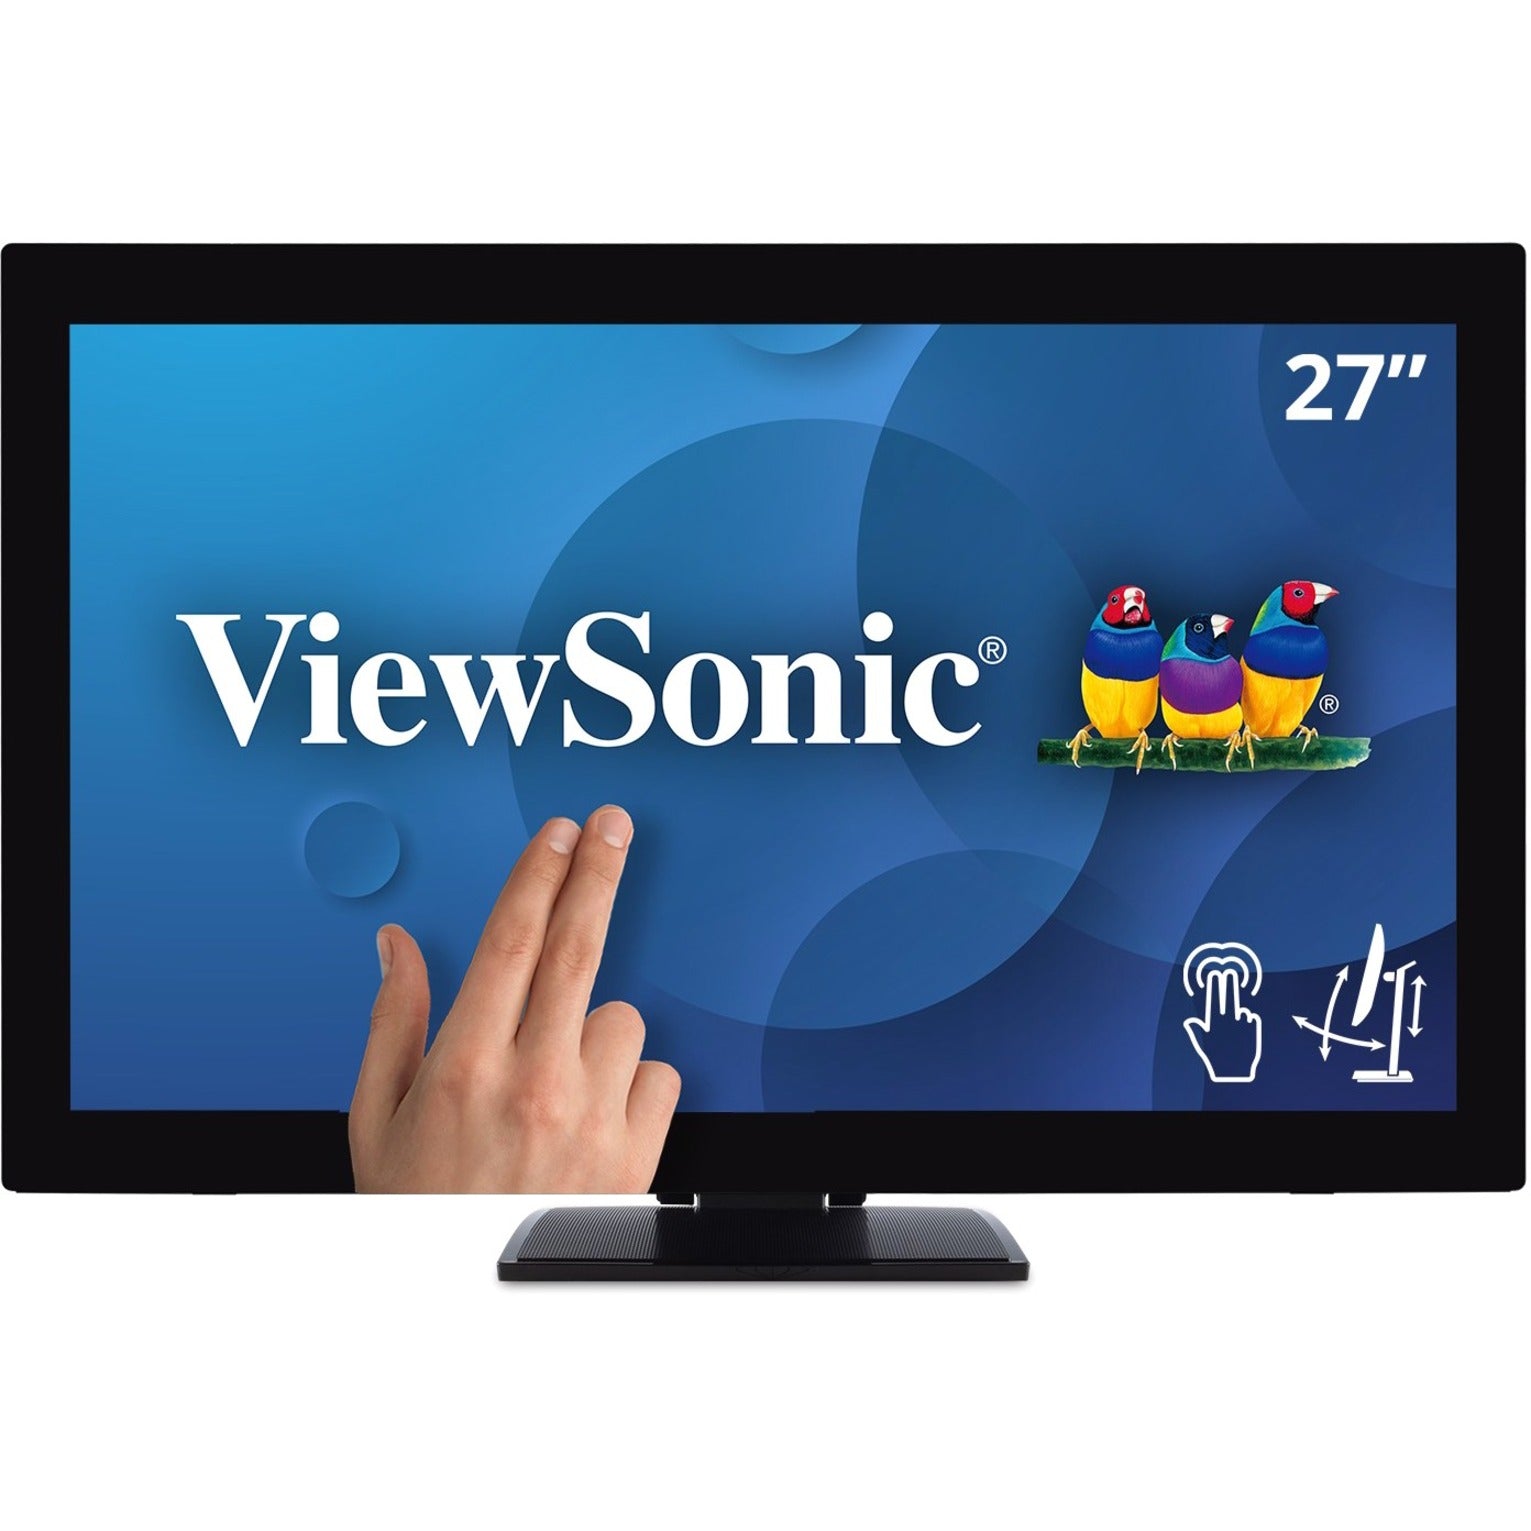 ViewSonic TD2760 27" Touch Display, 10-point Touch, Advanced Ergonomic Stand